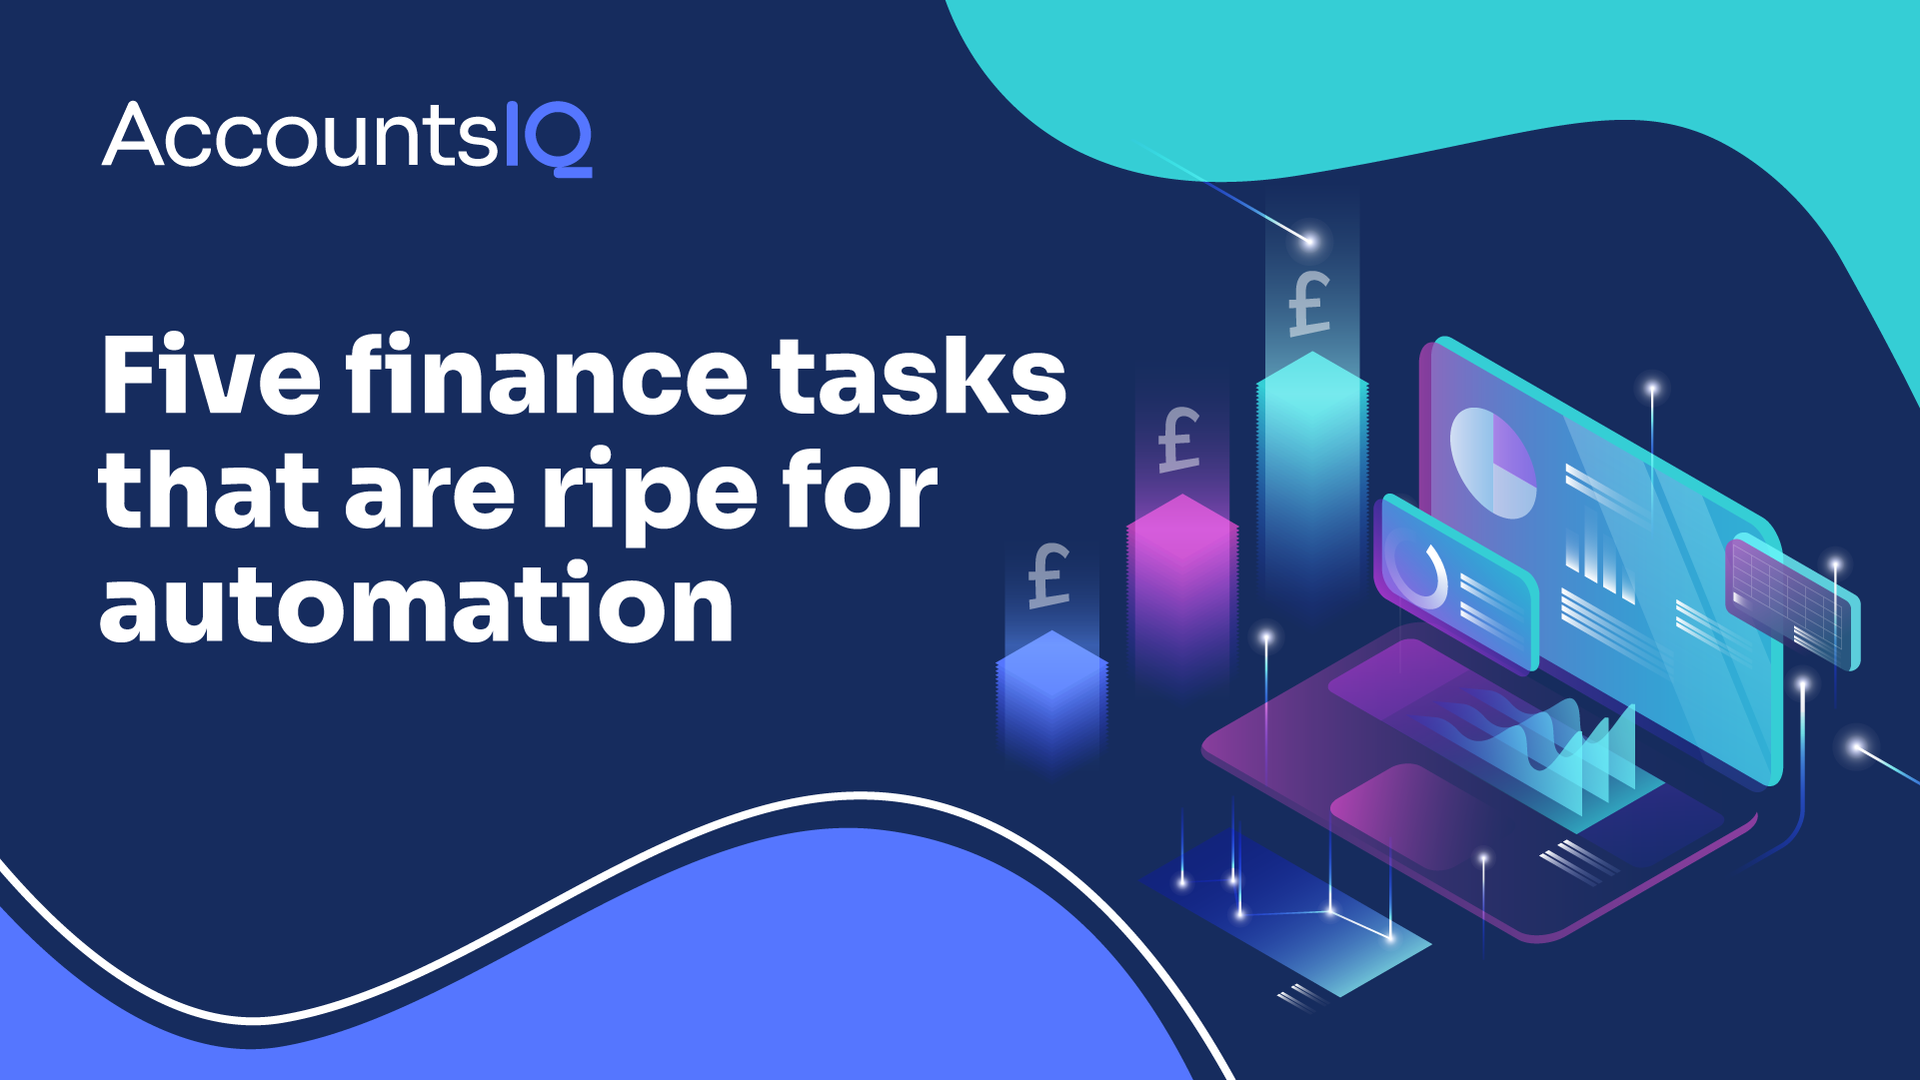 Five finance tasks that are ripe for automation